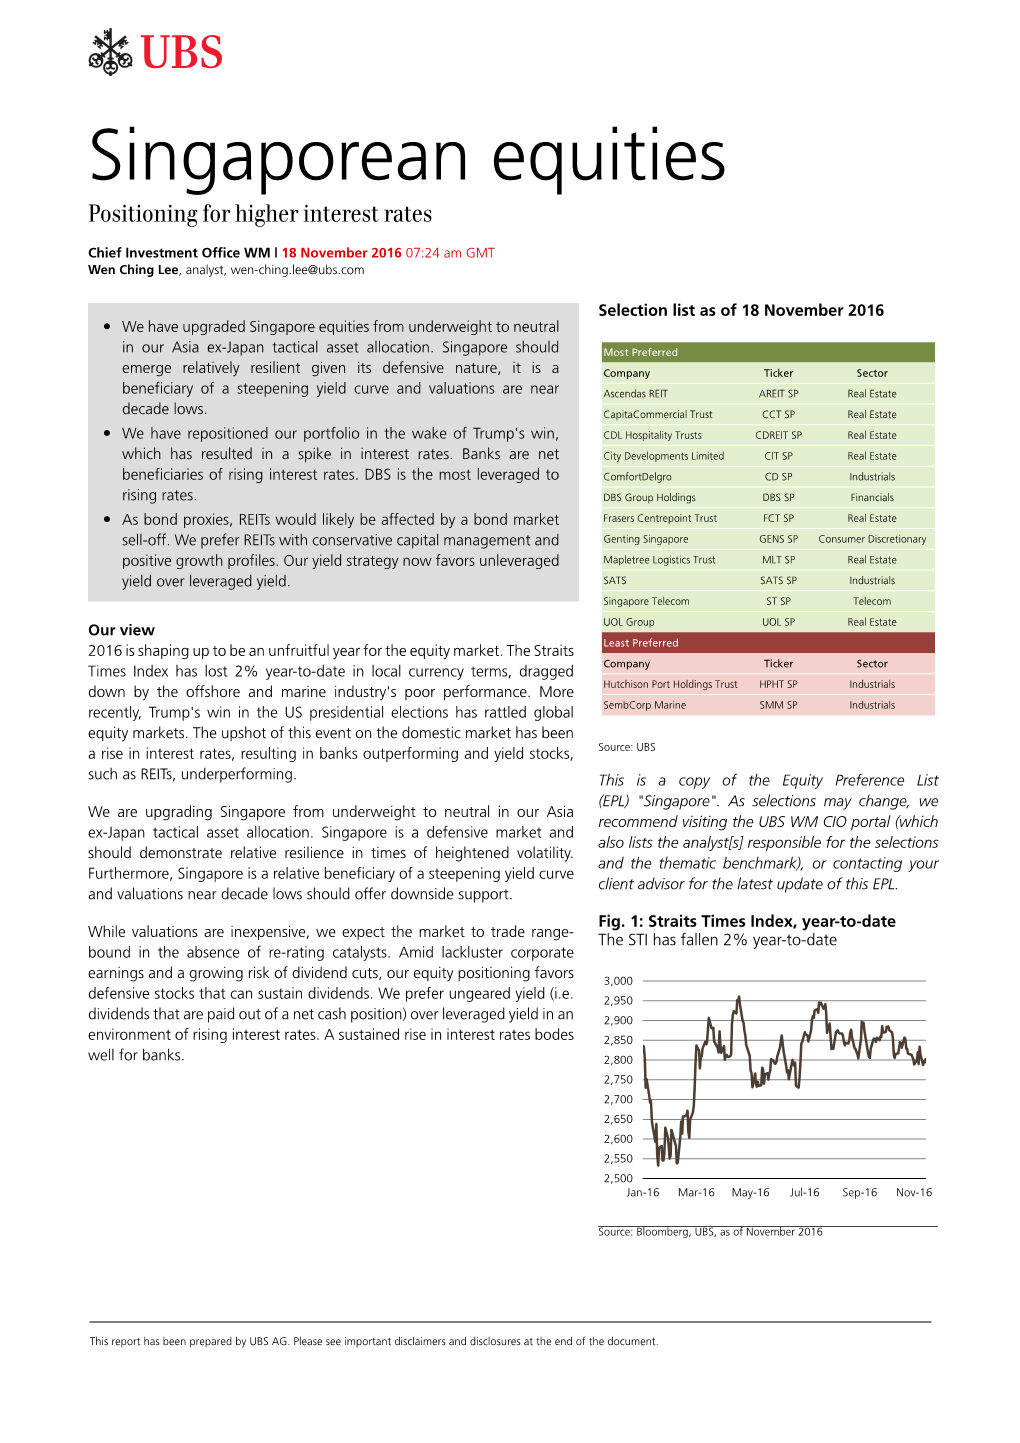 Singaporean Equities Positioning for Higher Interest Rates